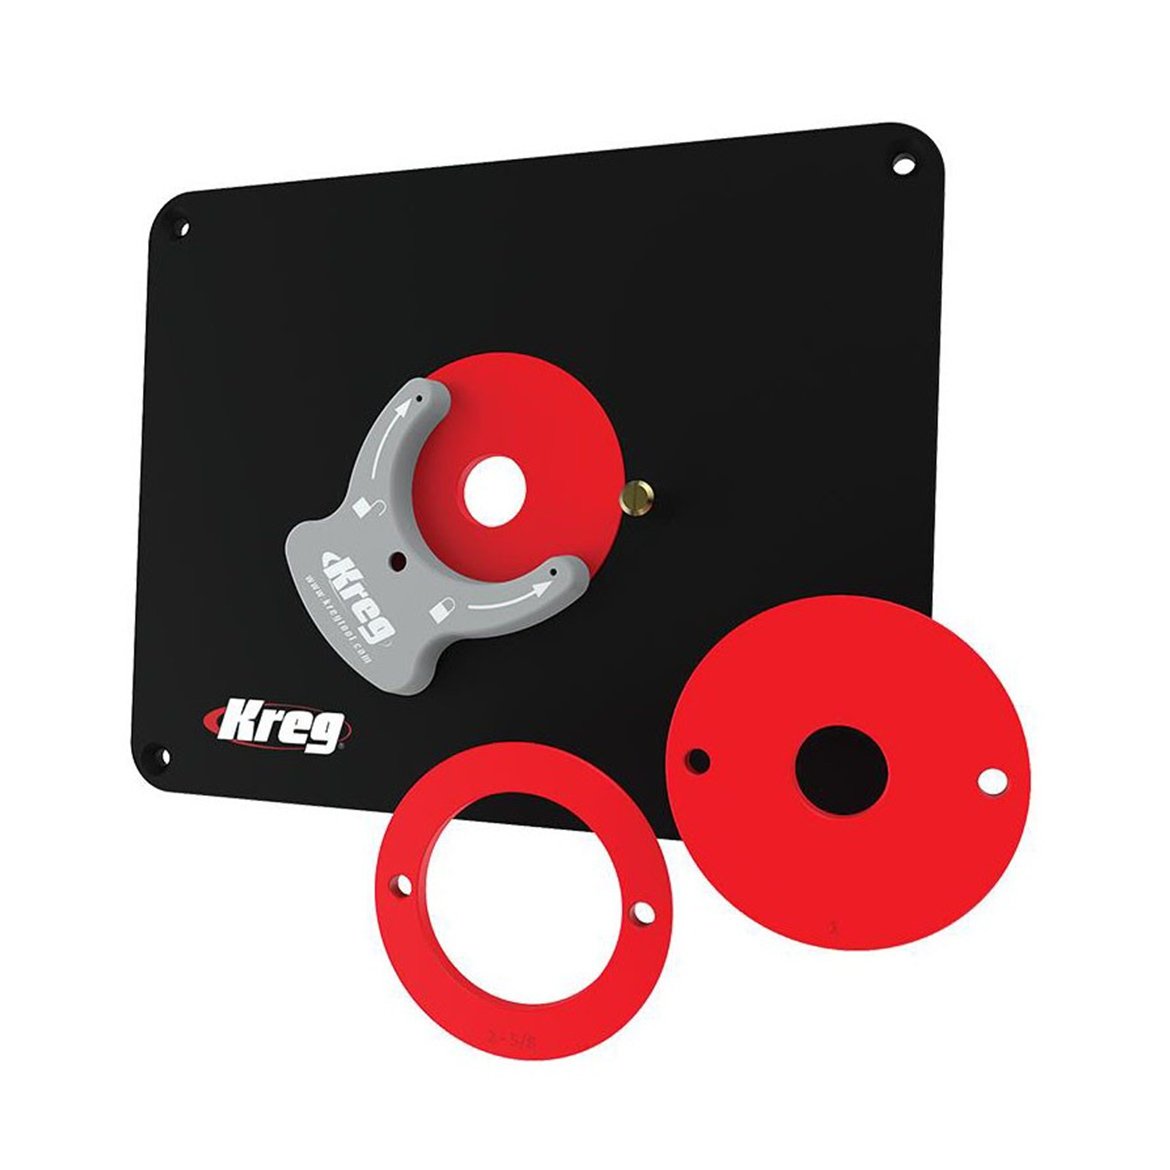 Kreg PRS4036 Router Table Insert Plate w/ Level-Loc Rings - Predrilled for Bosch